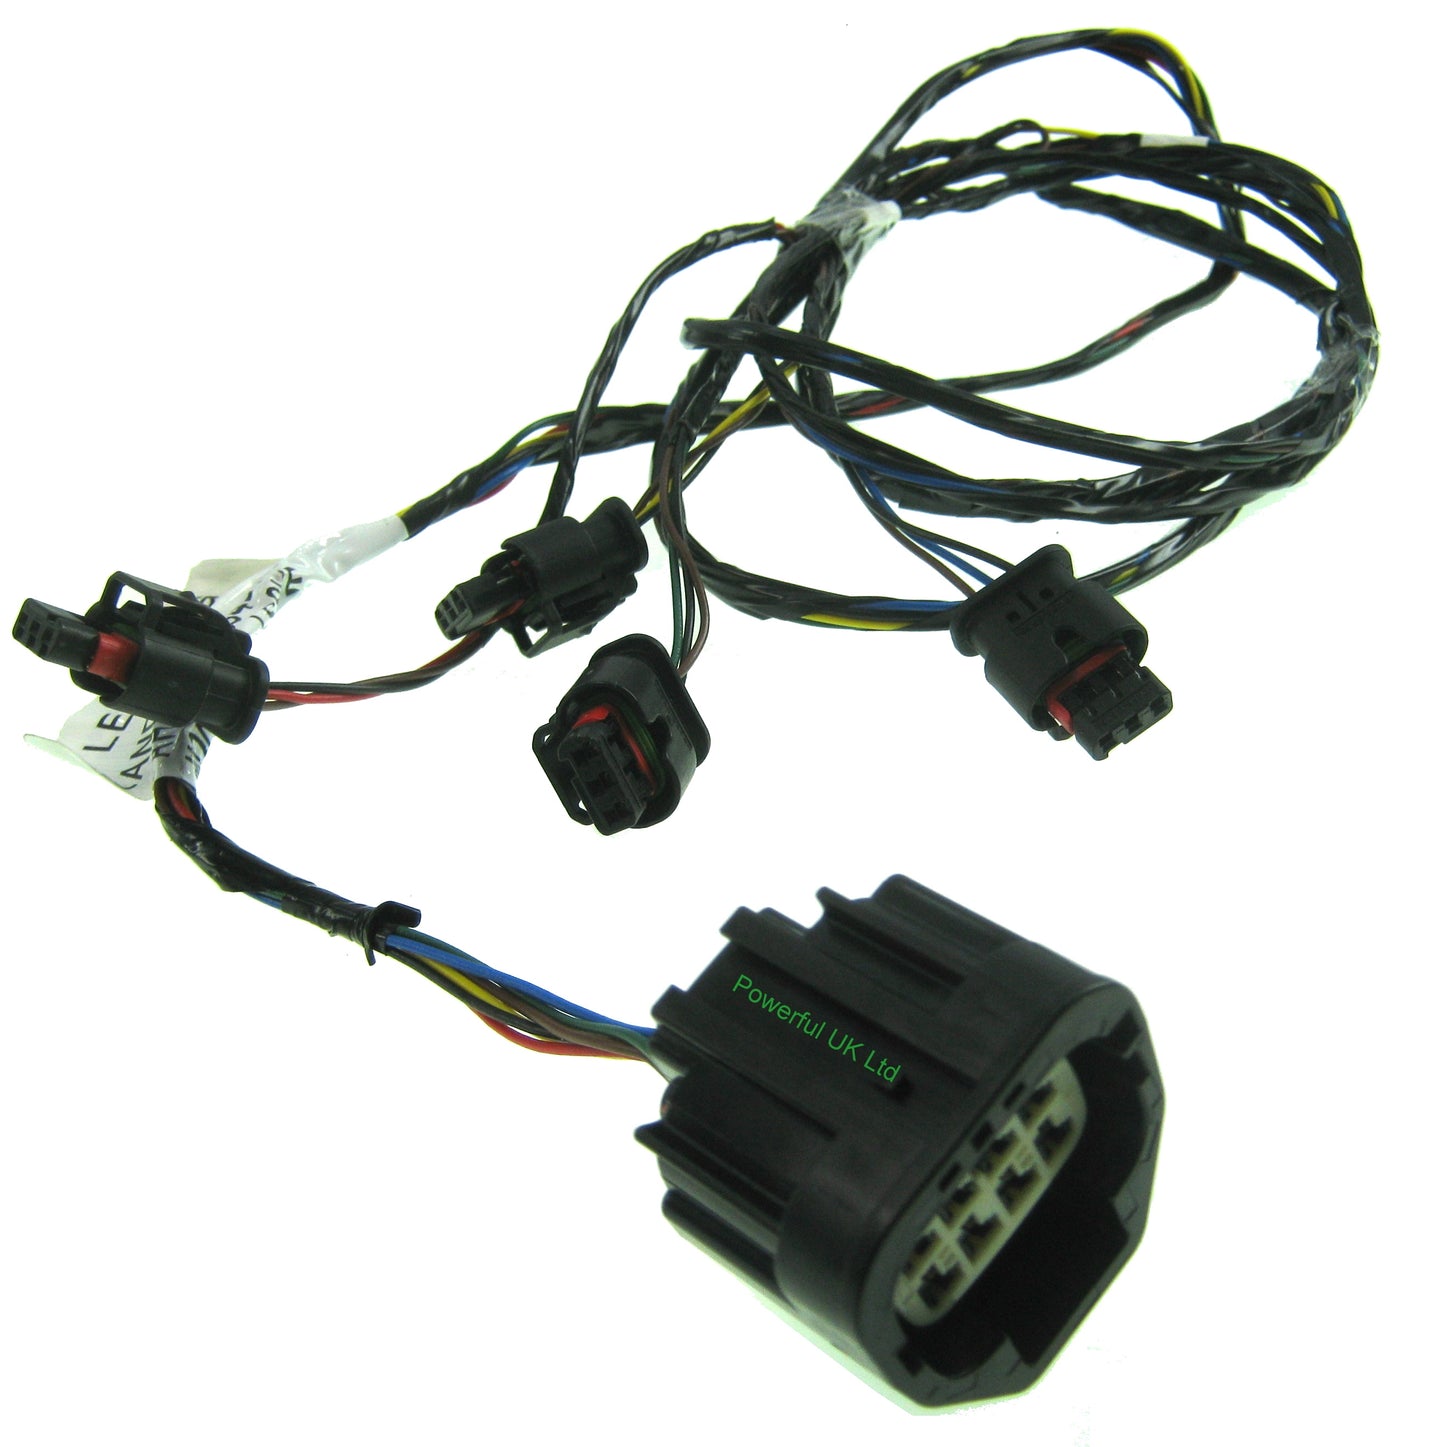 Rear Parking Sensor wiring loom for Land Rover Discovery 4